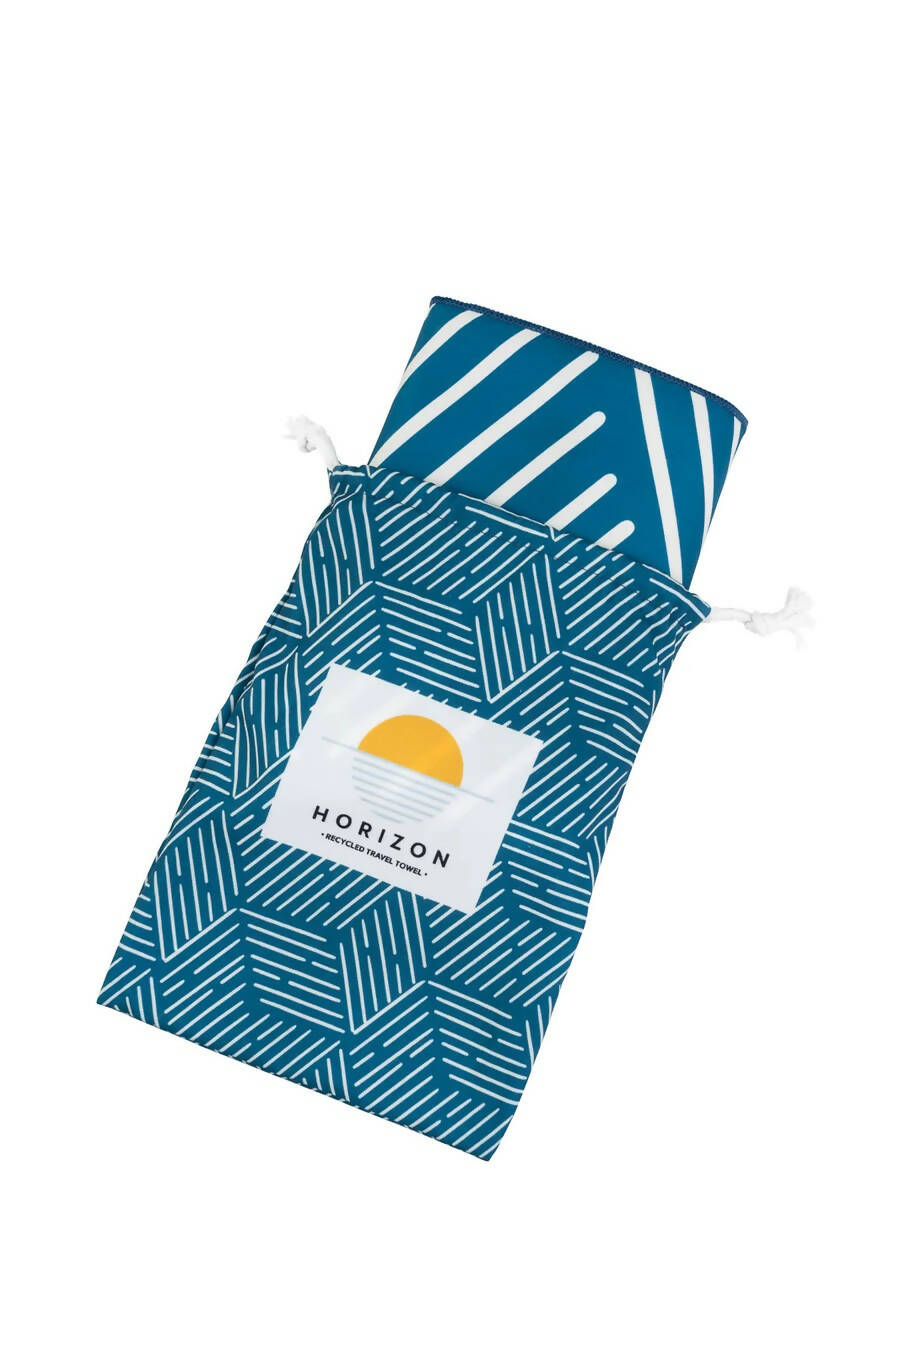 100% Recycled, Quick Dry, Travel / Beach Towel